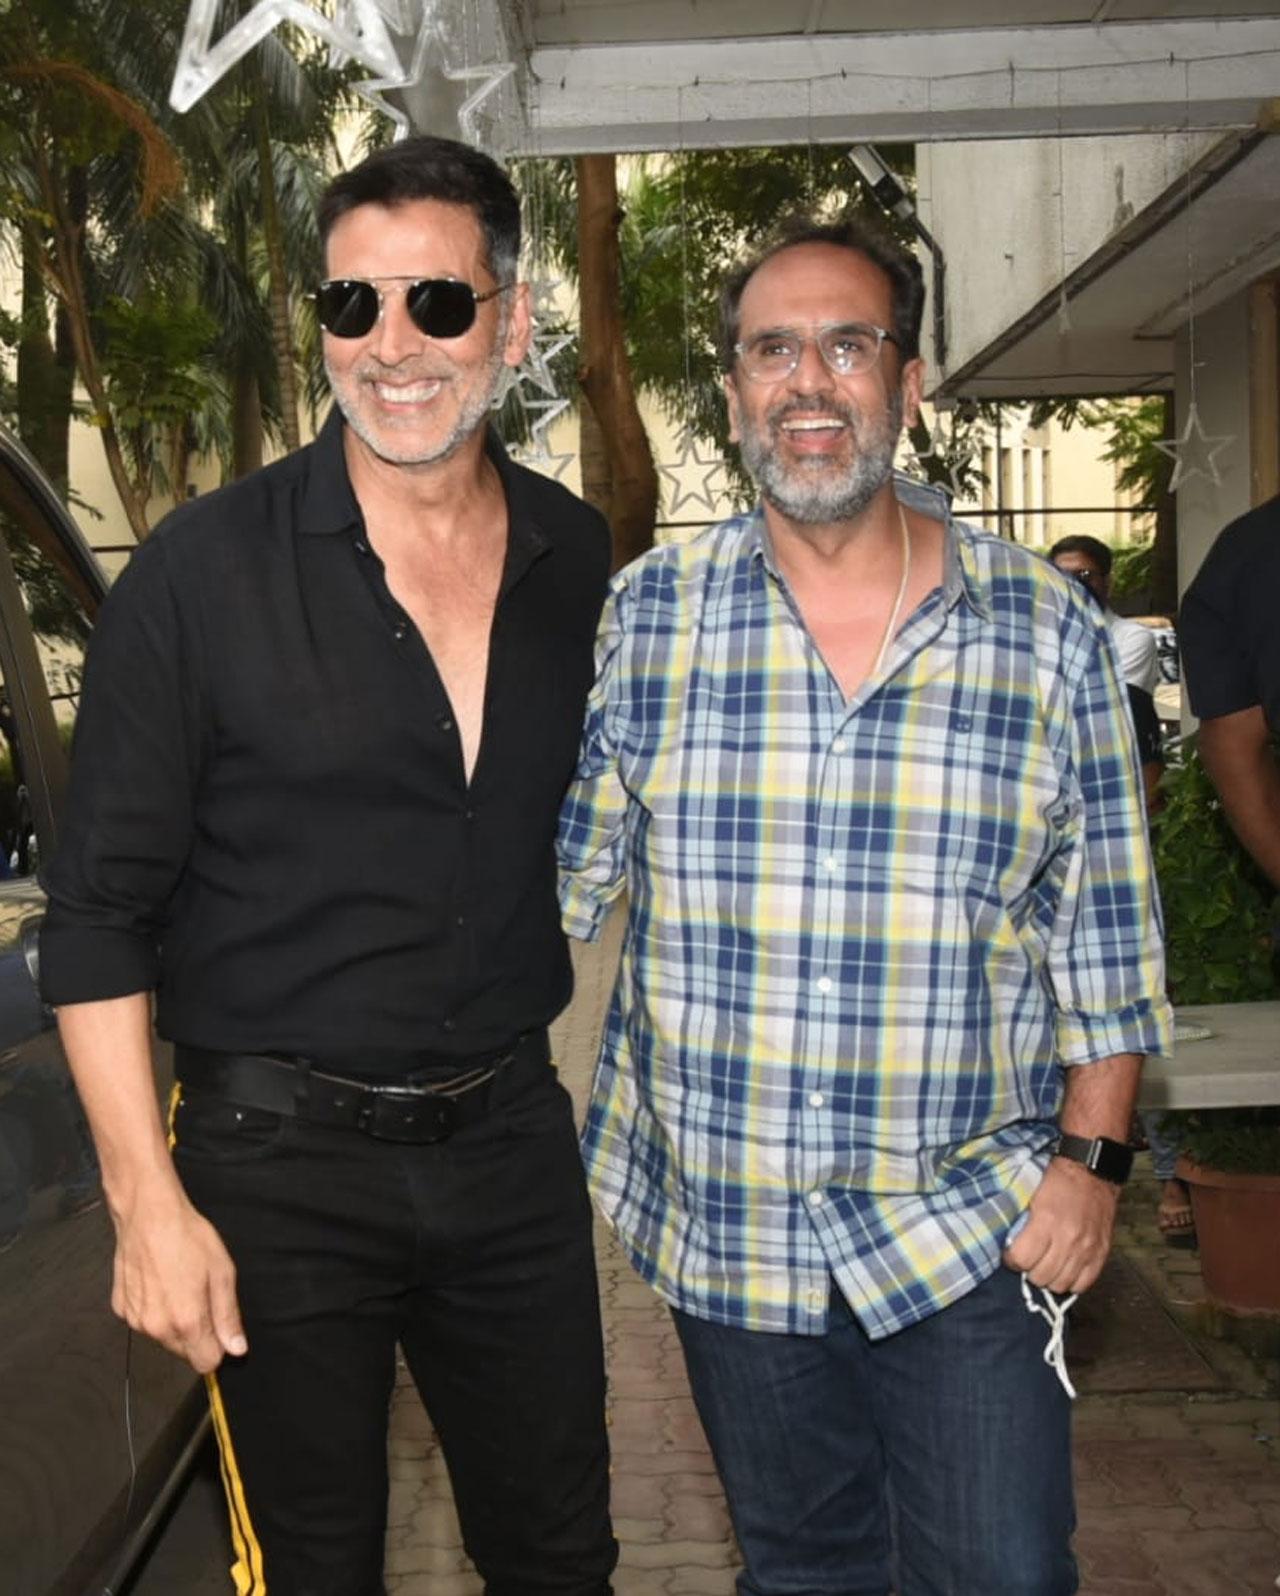 Akshay Kumar was clicked with filmmaker Aanand L Rai. The duo is gearing up for two consecutive films that are titled Atrangi Re and Raksha Bandhan. The former stars Sara Ali Khan and Dhanush and the latter Bhumi Pednekar.